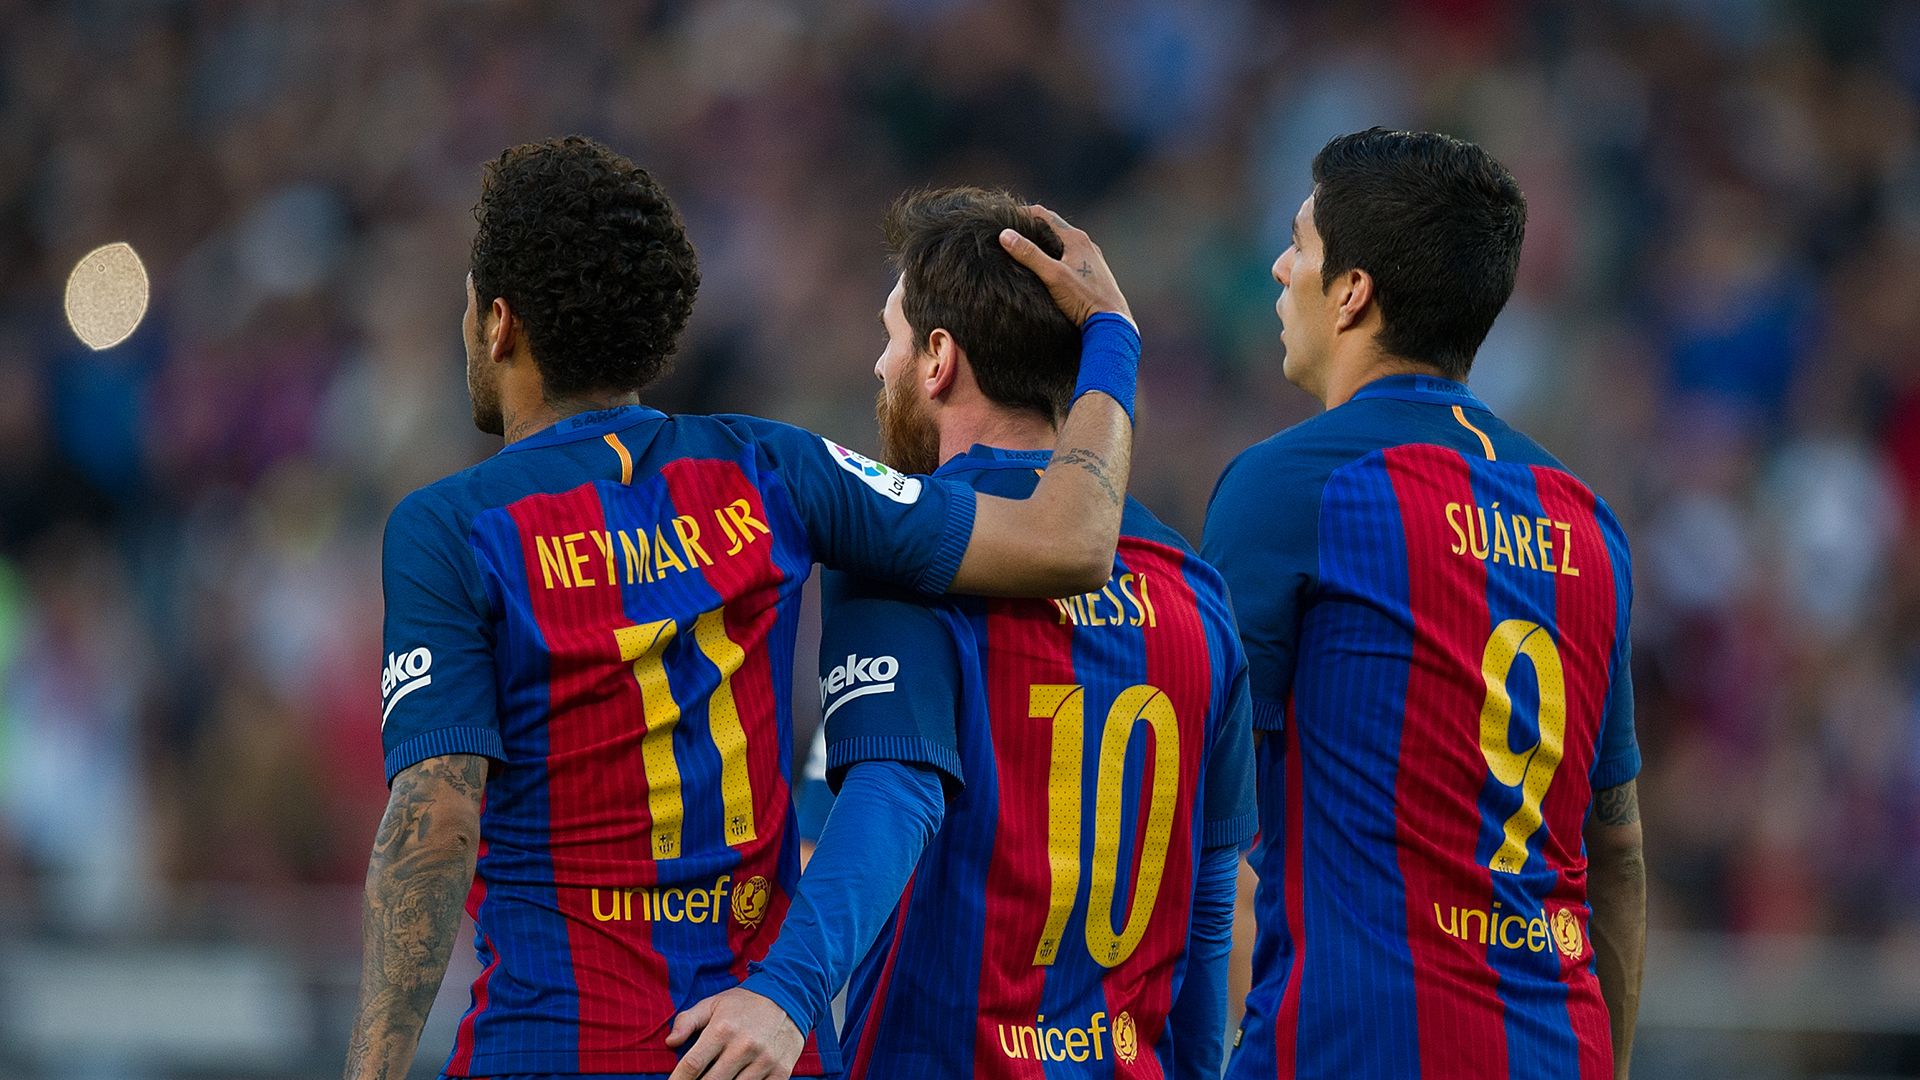 Man Utd's front three as special as Barcelona's MSN'